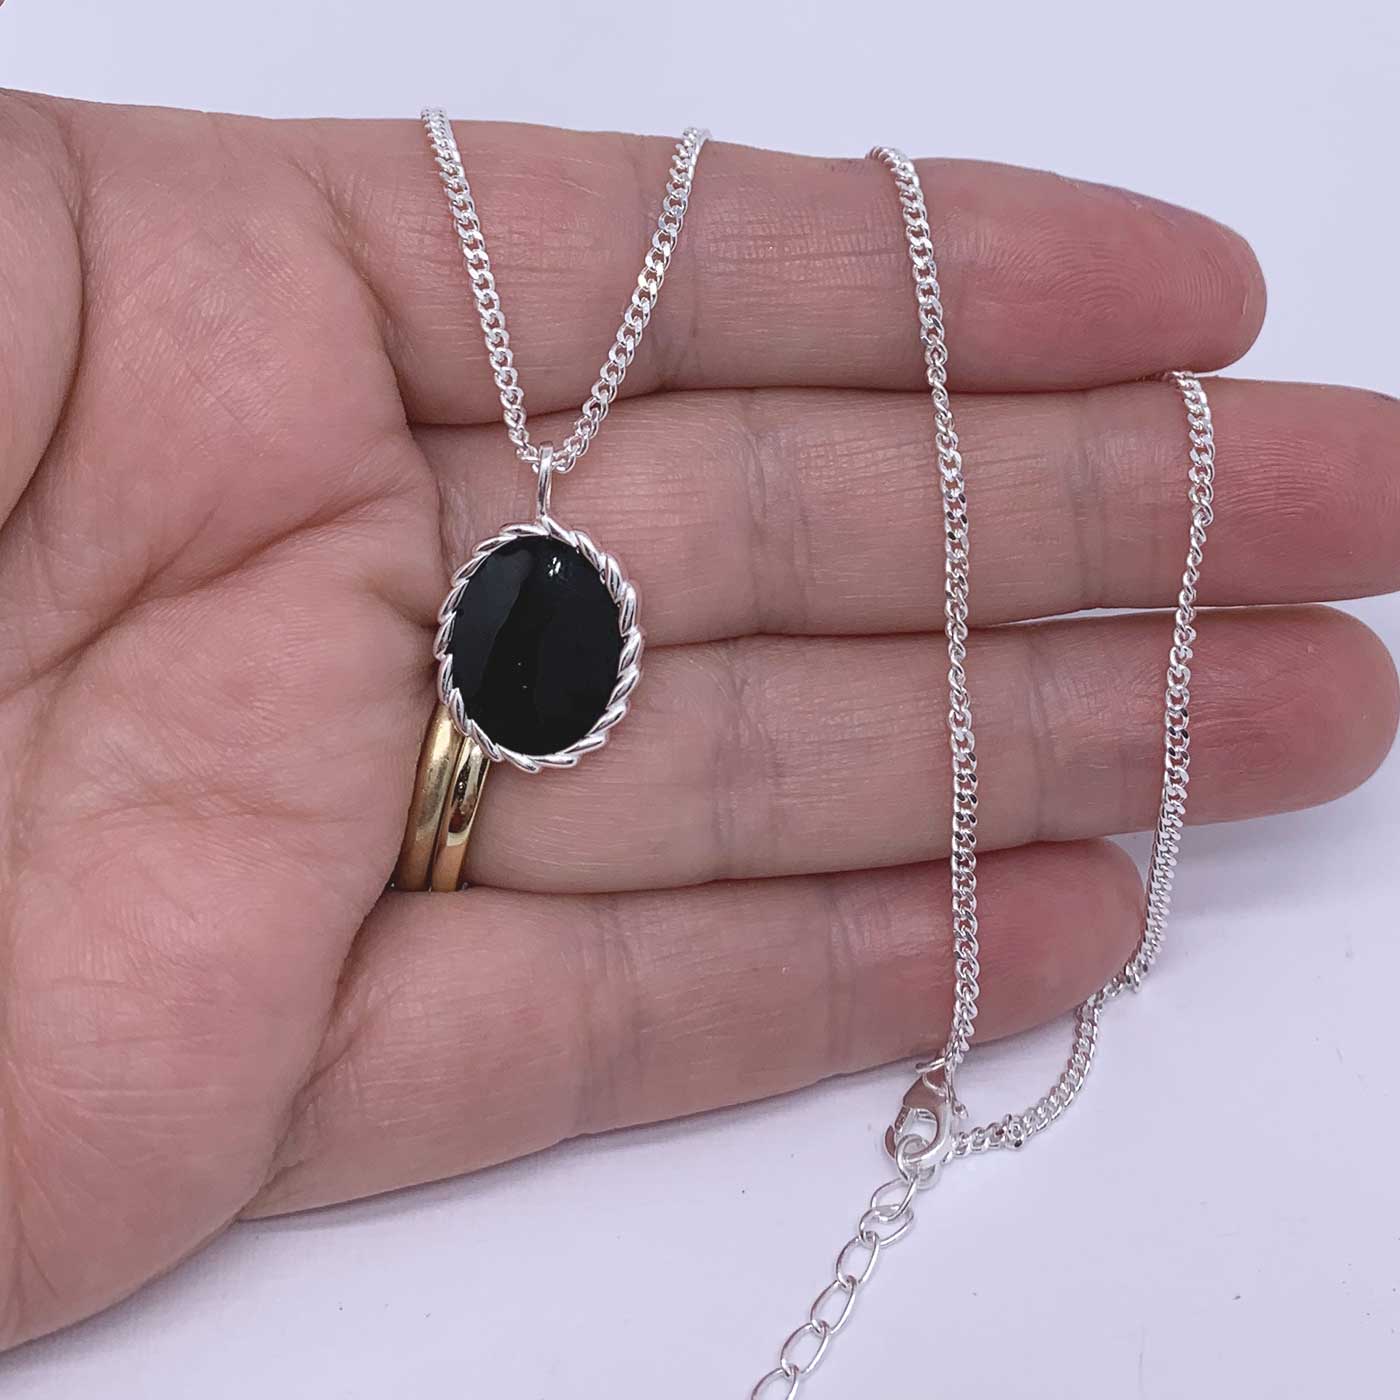 black and silver modern pendant necklace